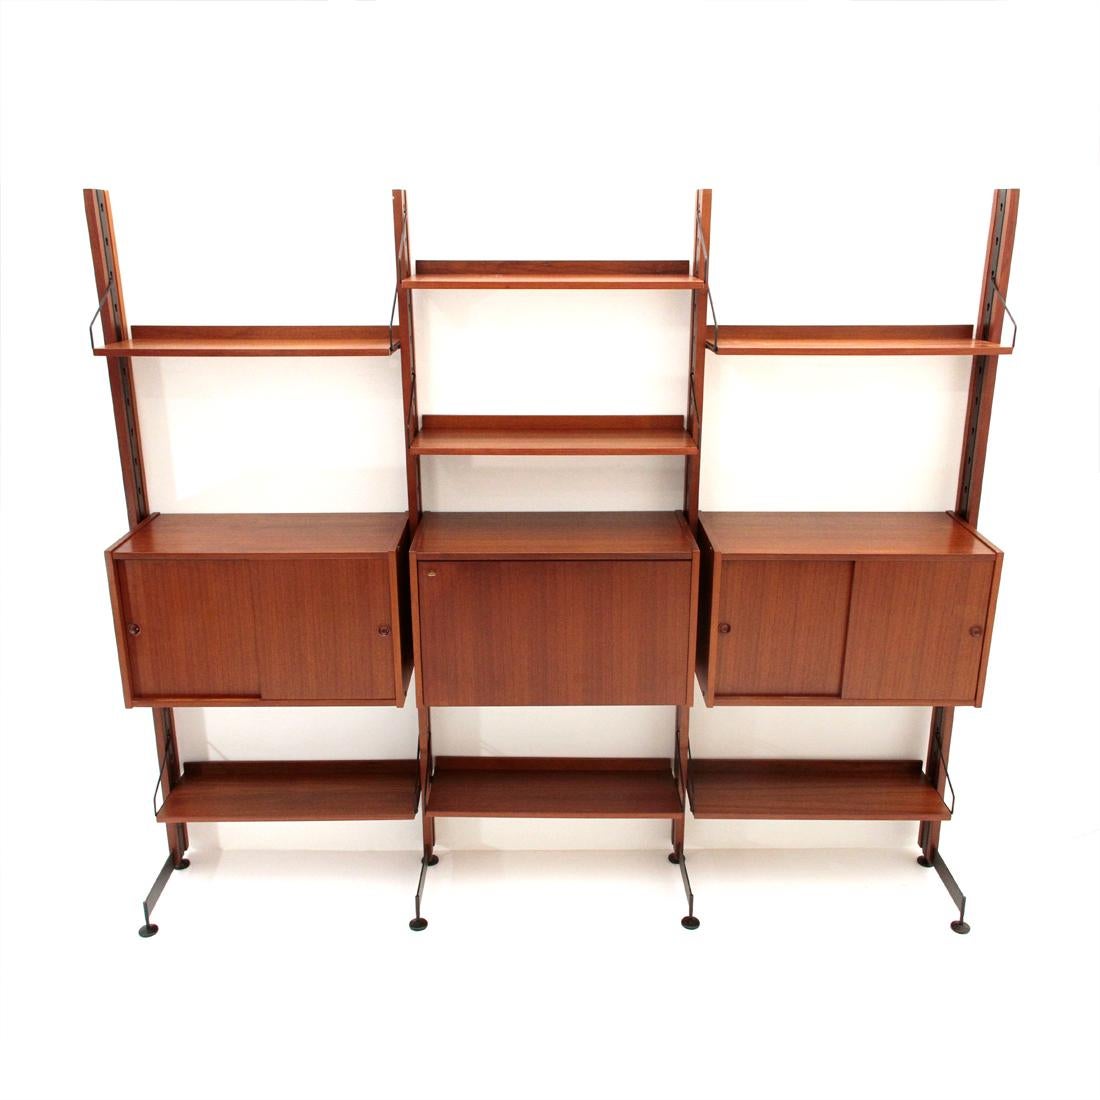 Italian Selex Teak and Metal Wall Unit by Industrial Mobili Barovero, 1960s